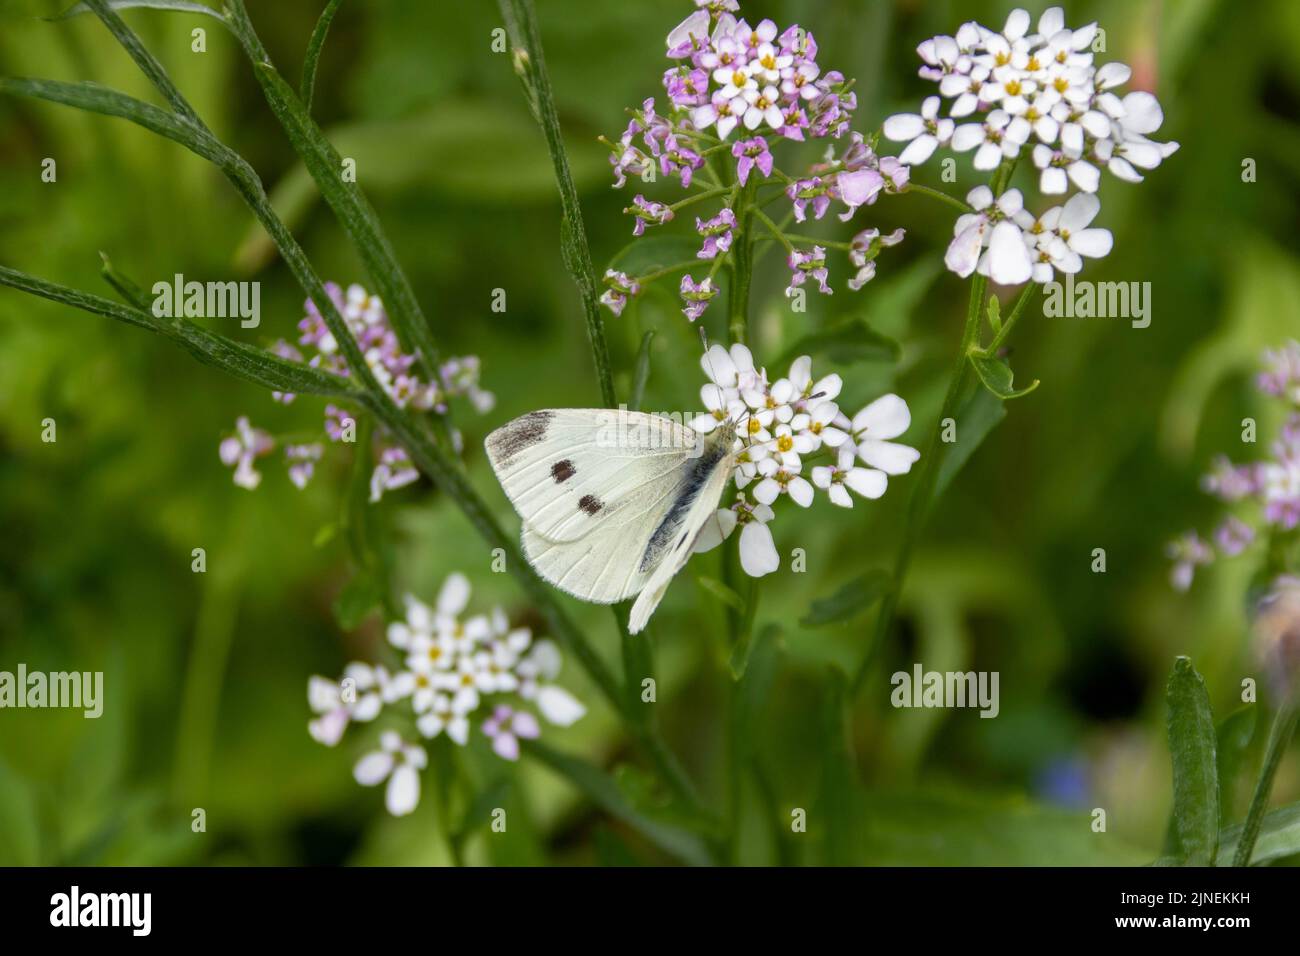 the small white butterfly also known as the cabbage white resting on candytuft flowers which symbolise indifference Stock Photo